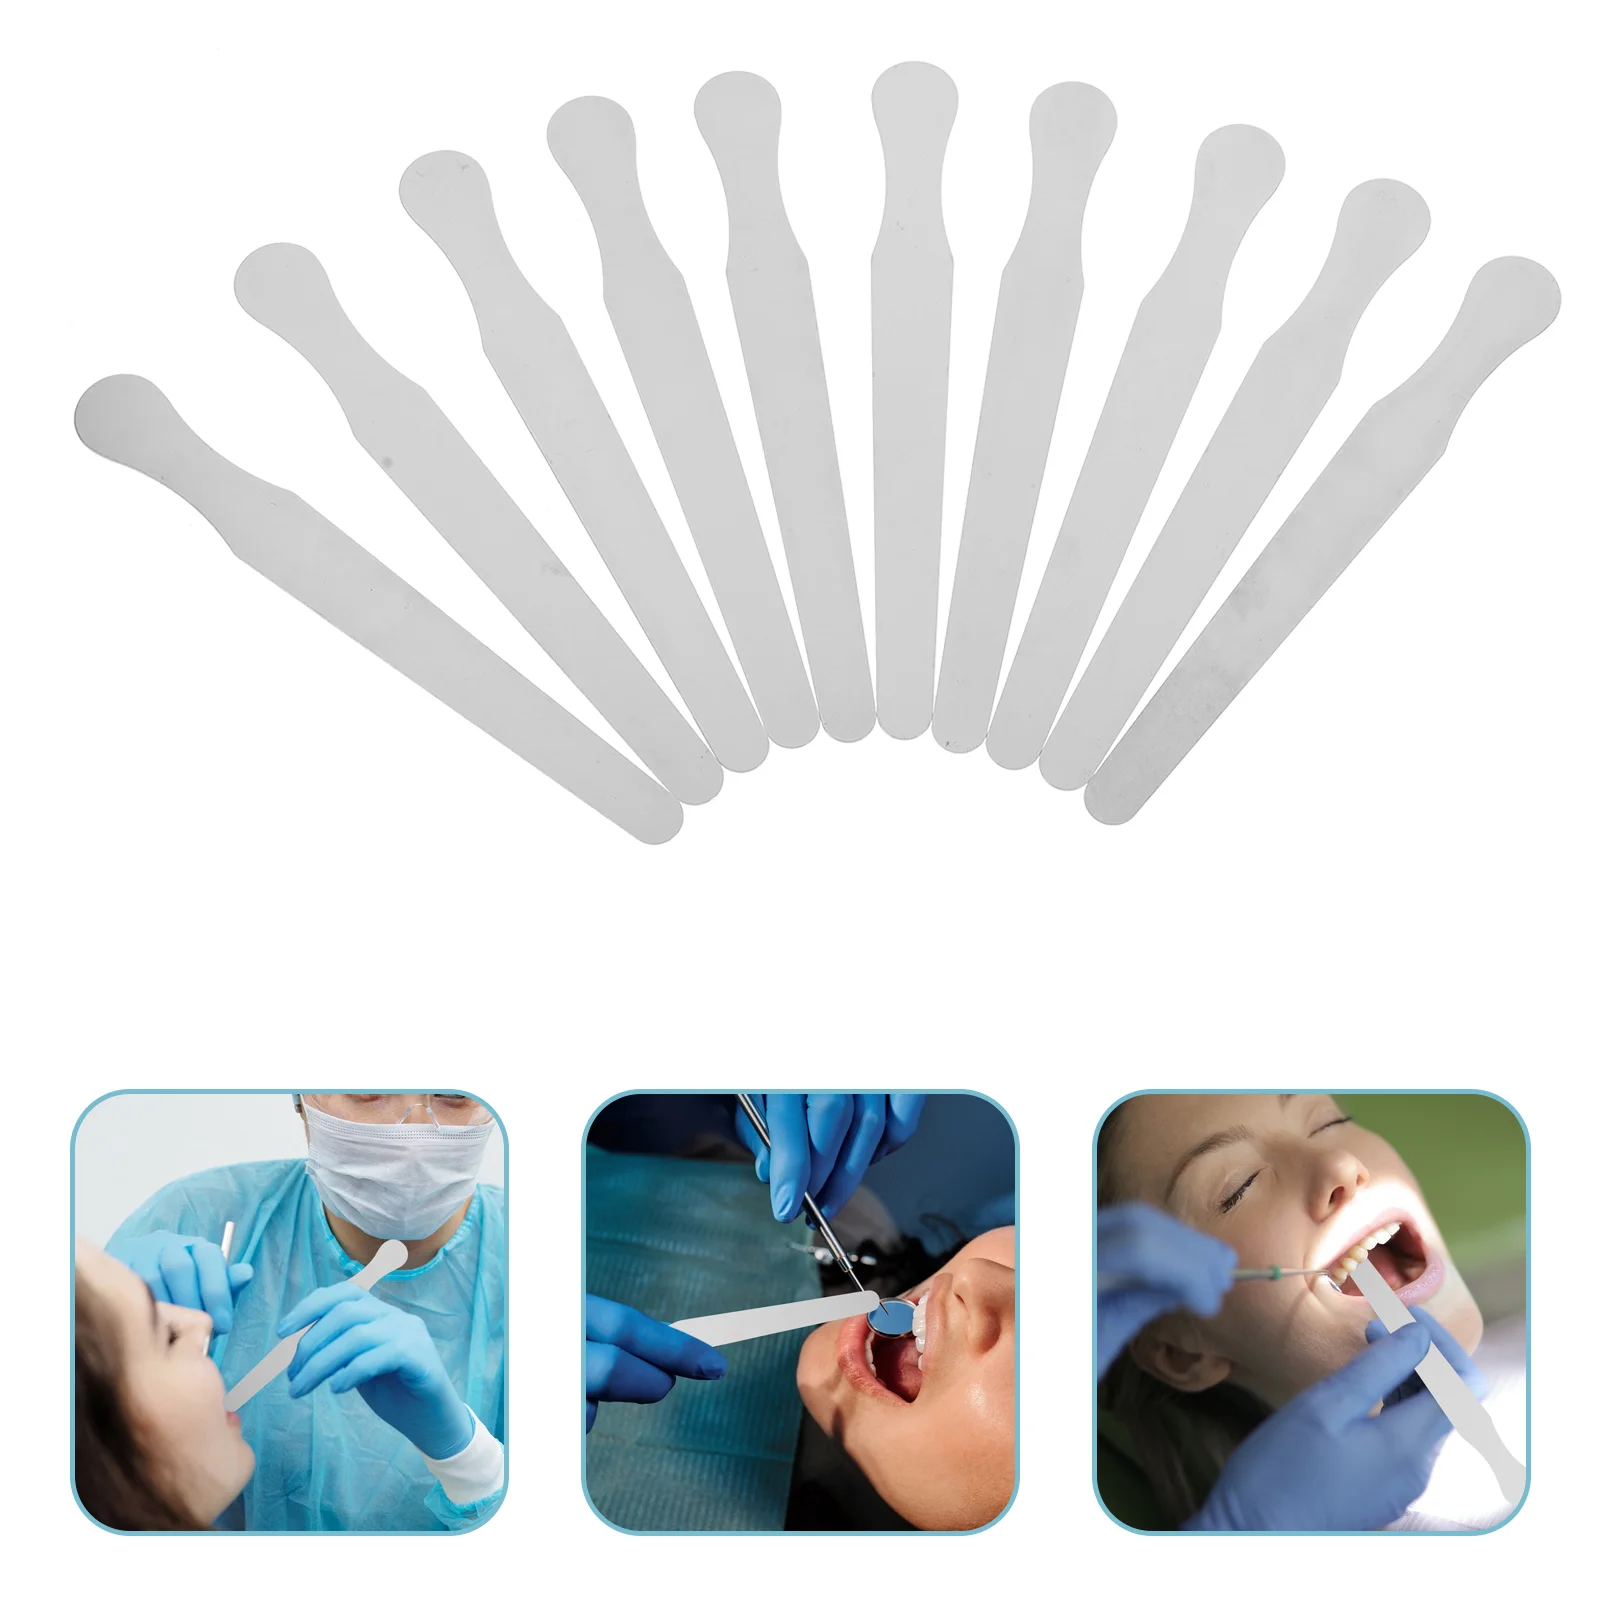 

10 Pcs Stainless Steel Tongue Depressor Spatulas Smooth Mixing Plates Professional Dental Clinic Supplies Practical